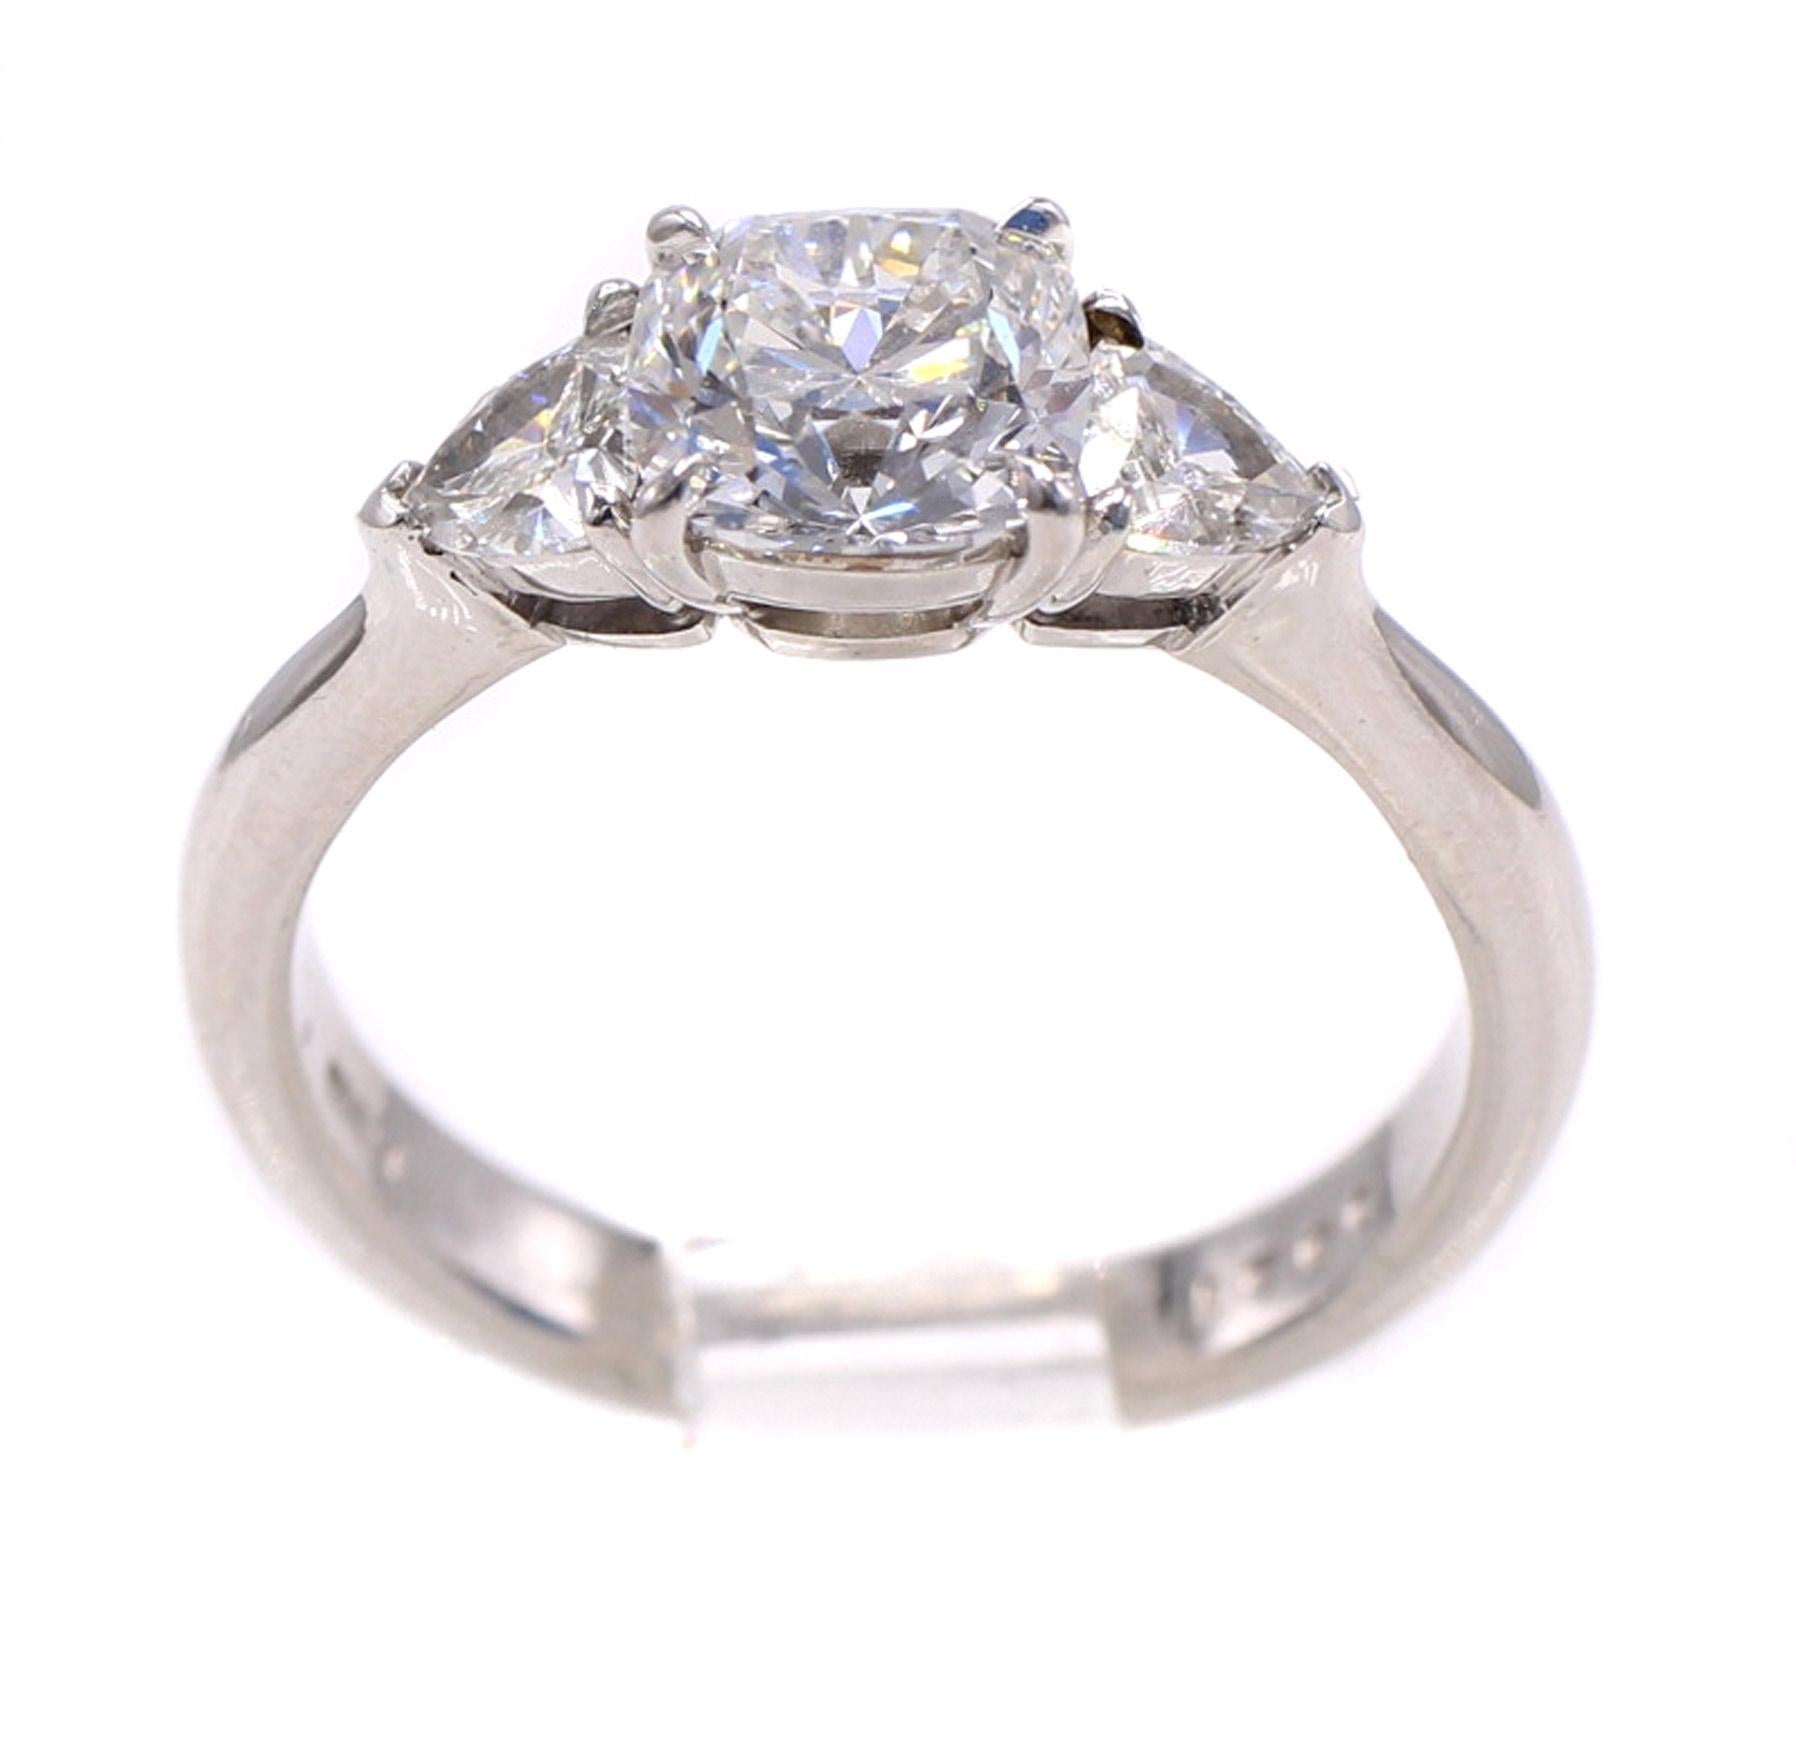 A beautifully cut bright and lively cushion brilliant weighing 1.12 carats is the centerpiece of this wonderfully handcrafted platinum engagement ring. The cushion is accompanied by a report from the GIA grading the color as E and the clarity as